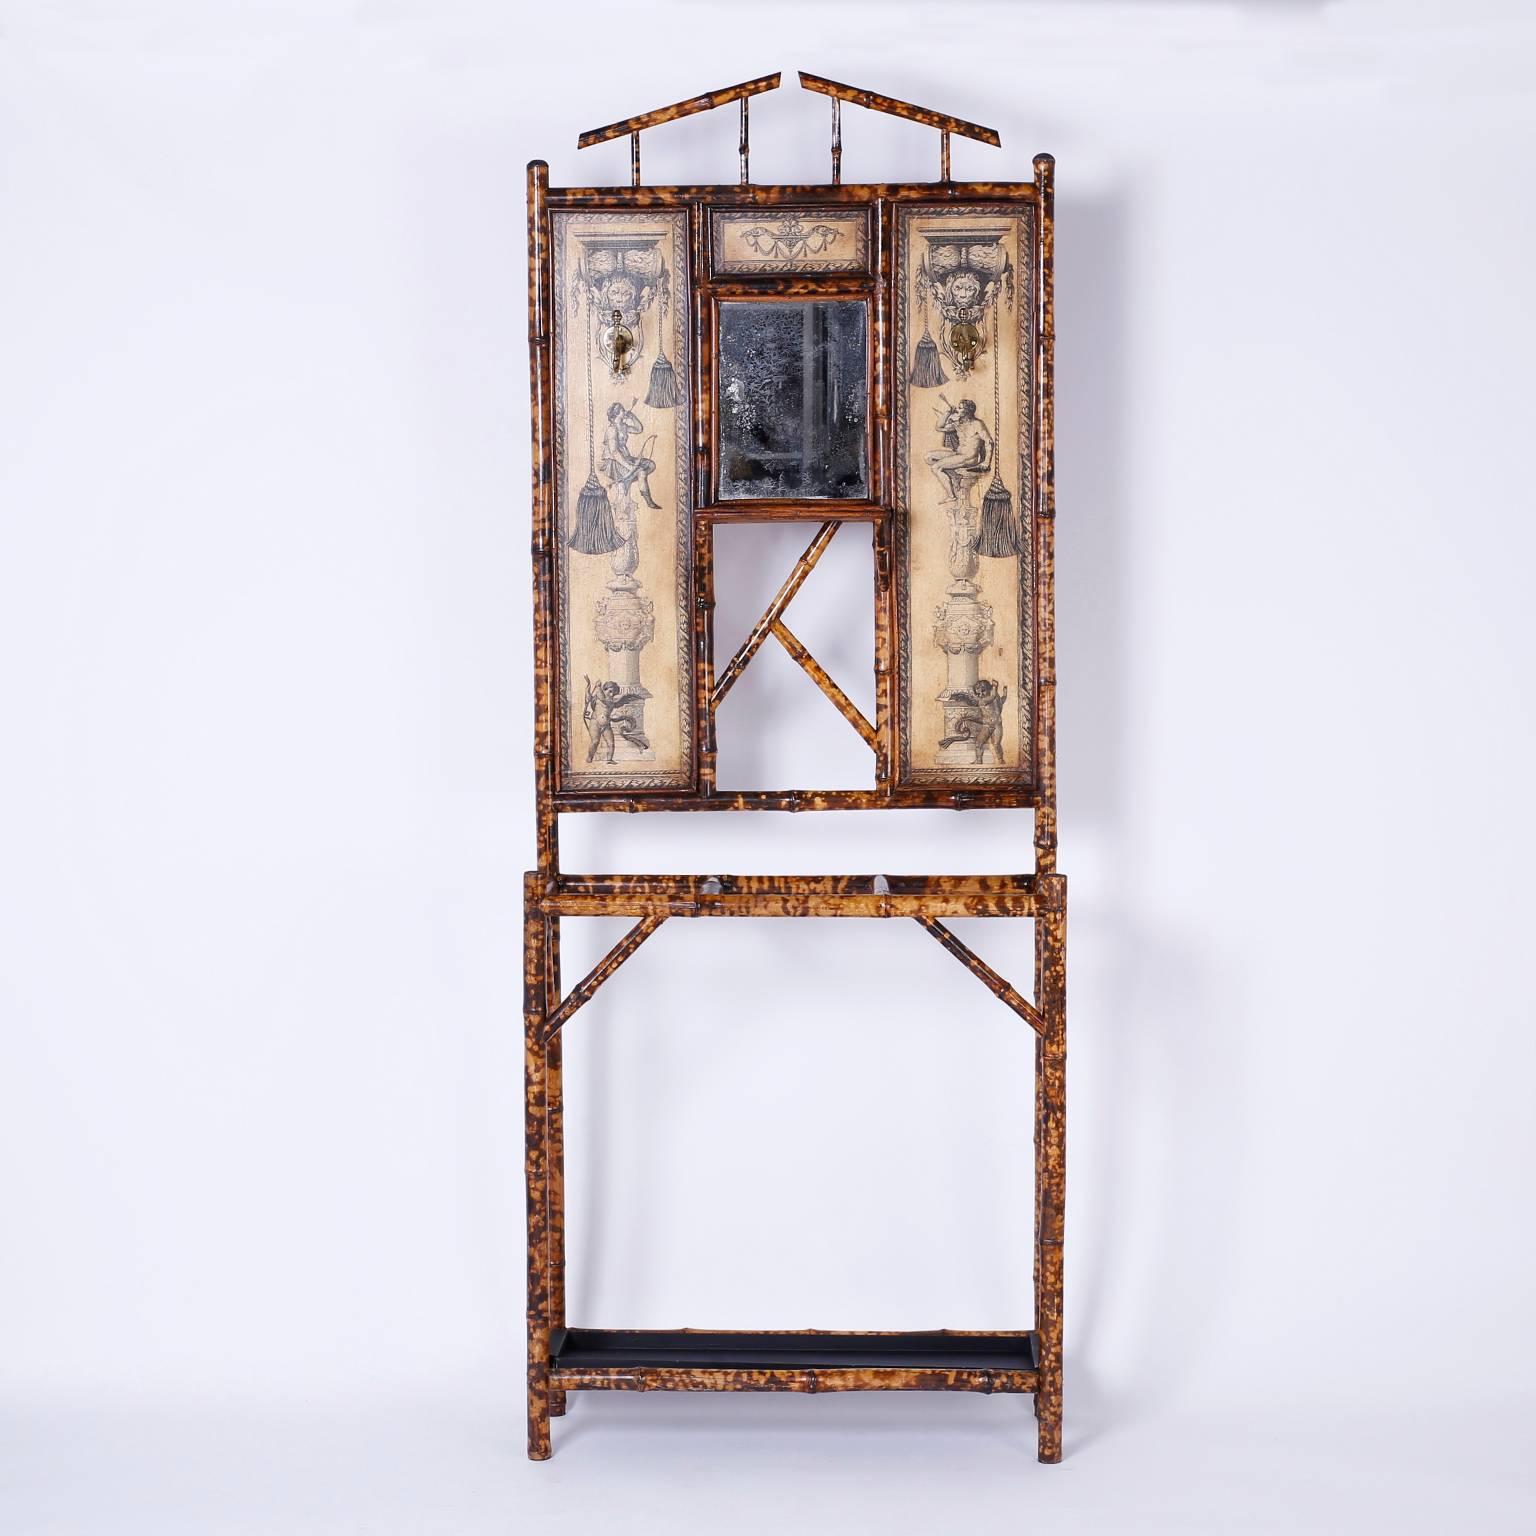 Antique 19th century English burnt bamboo hall tree with built in umbrella or cane stand and featuring brass coat hooks and background panels decorated with classical decoupage.